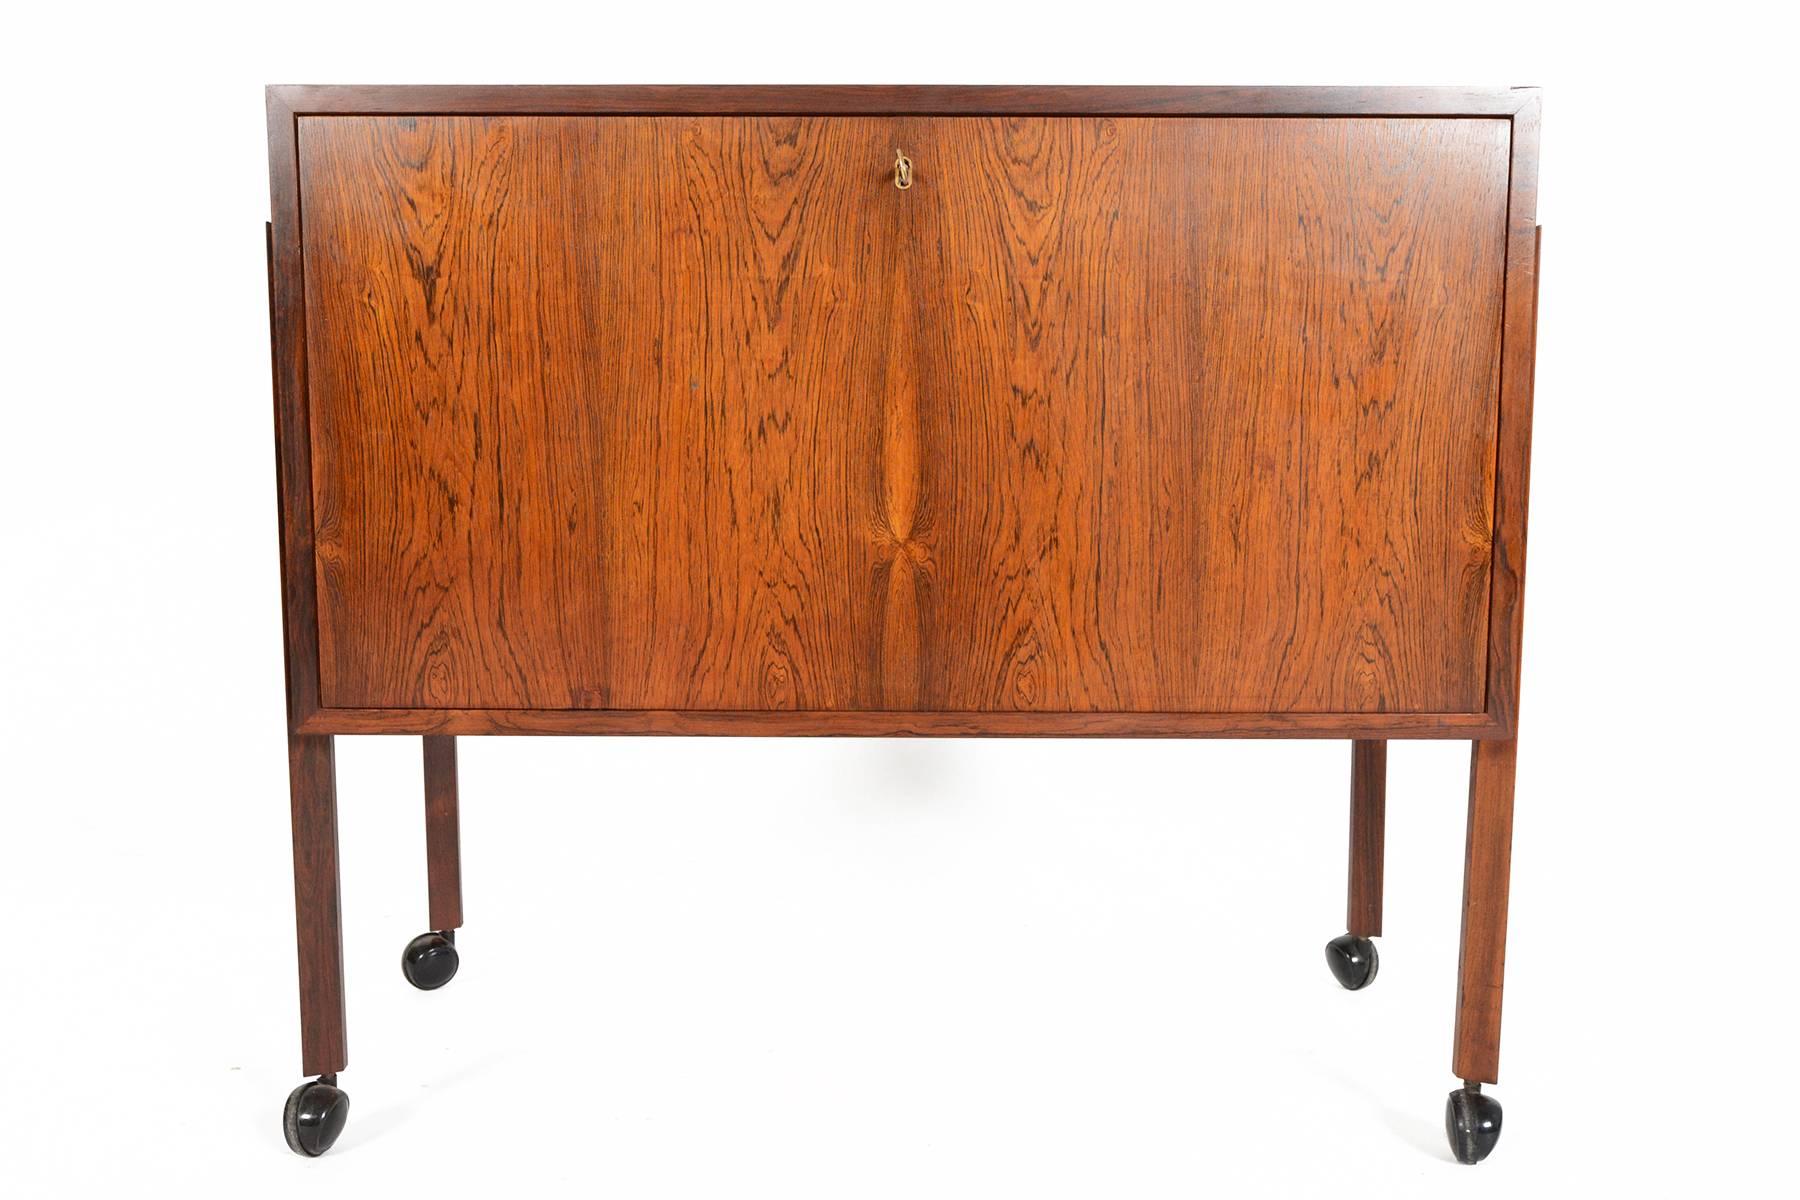 This Danish modern Mid-Century bar cart in Brazilian rosewood will be a wonderful addition to any modern home. This wonderful cart features a large drop down door which opens to expose an oak lined interior with six laminate lined bottle holders.